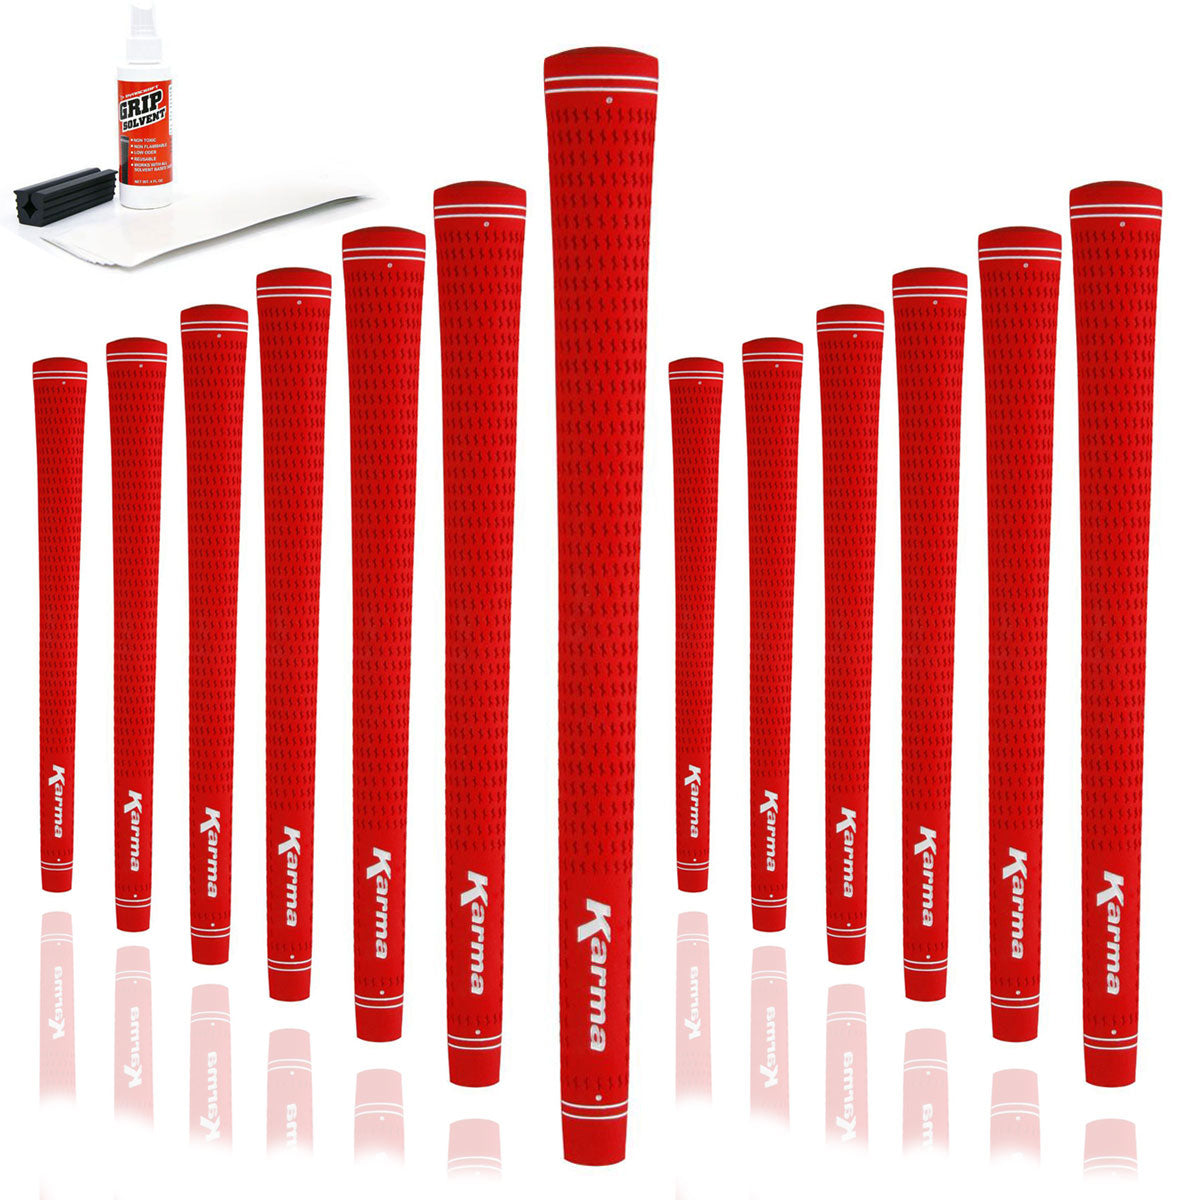 13 Karma Velour Red golf grips, golf grip tape strips, bottle of grip solvent and rubber shaft clamp